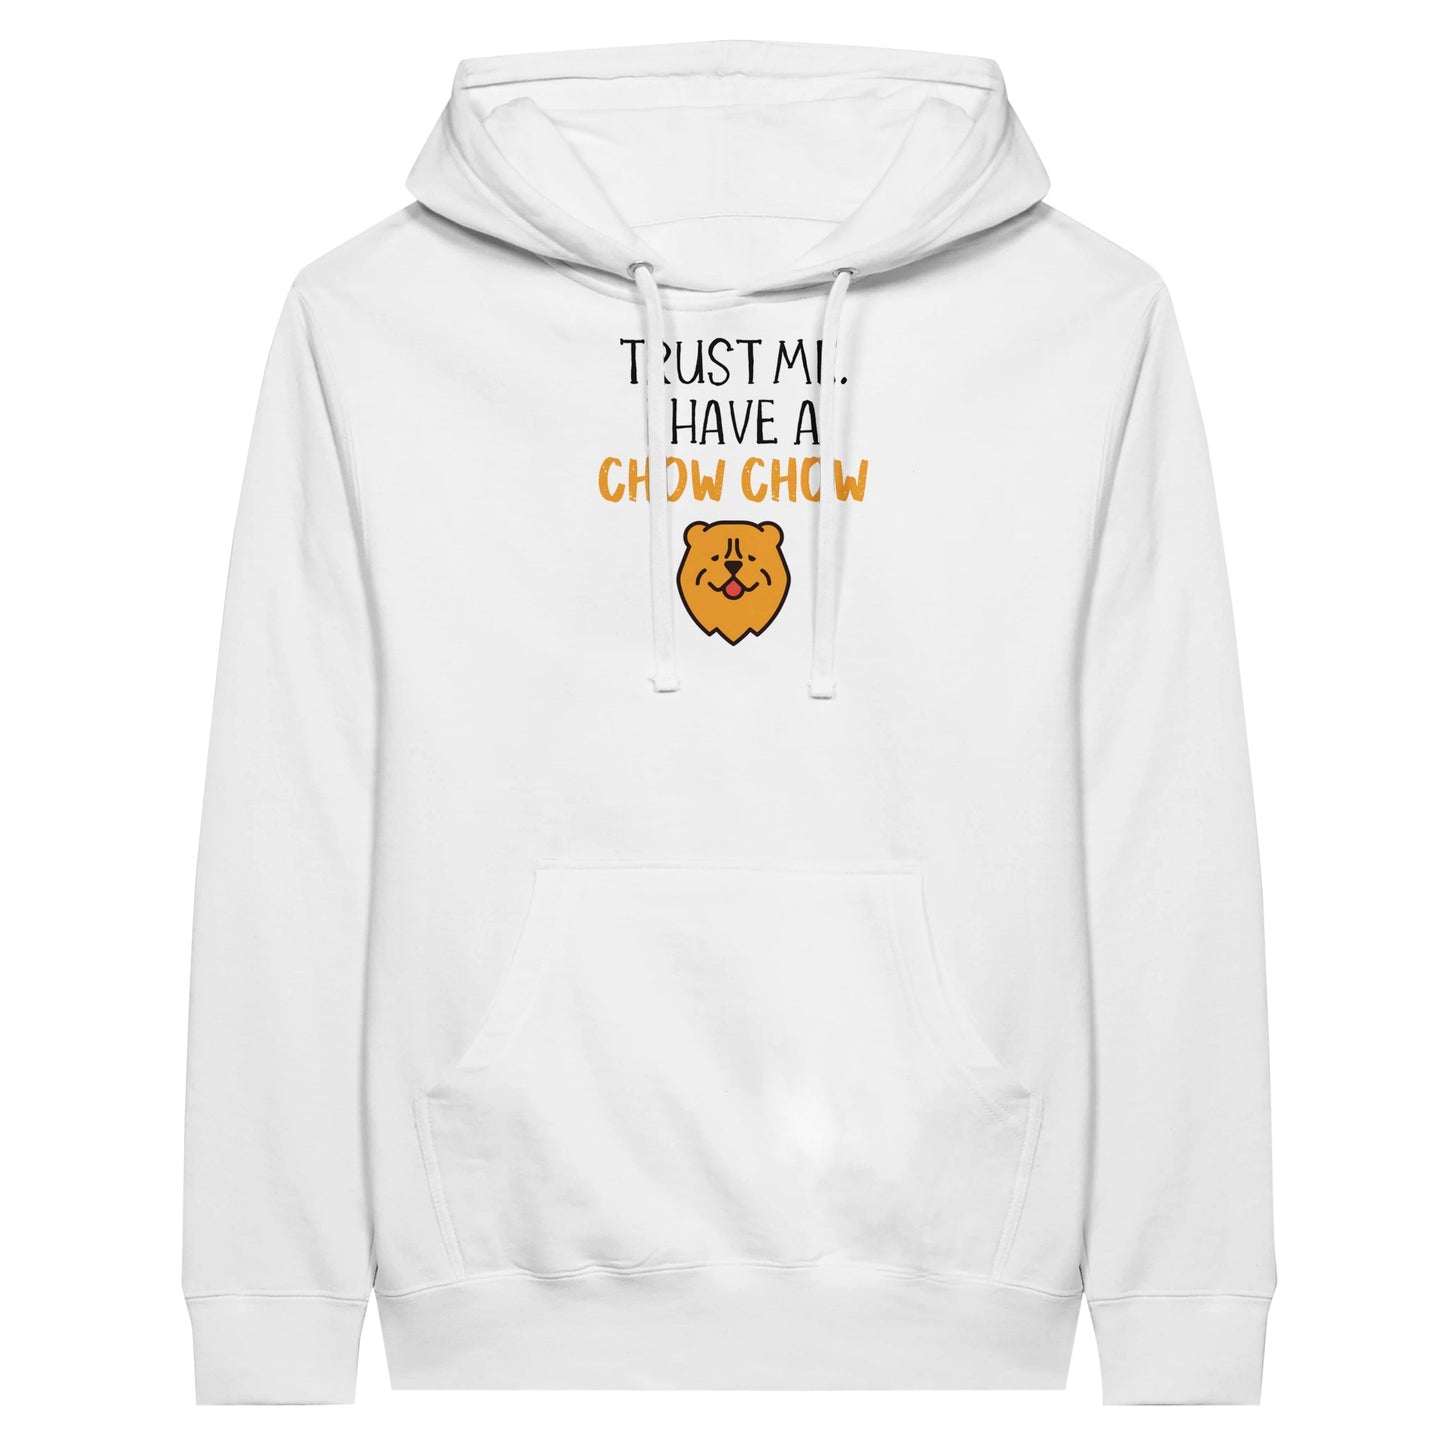 Unisex hoodie with the slogan: "Trust Me. I have a Chow Chow". Color is white